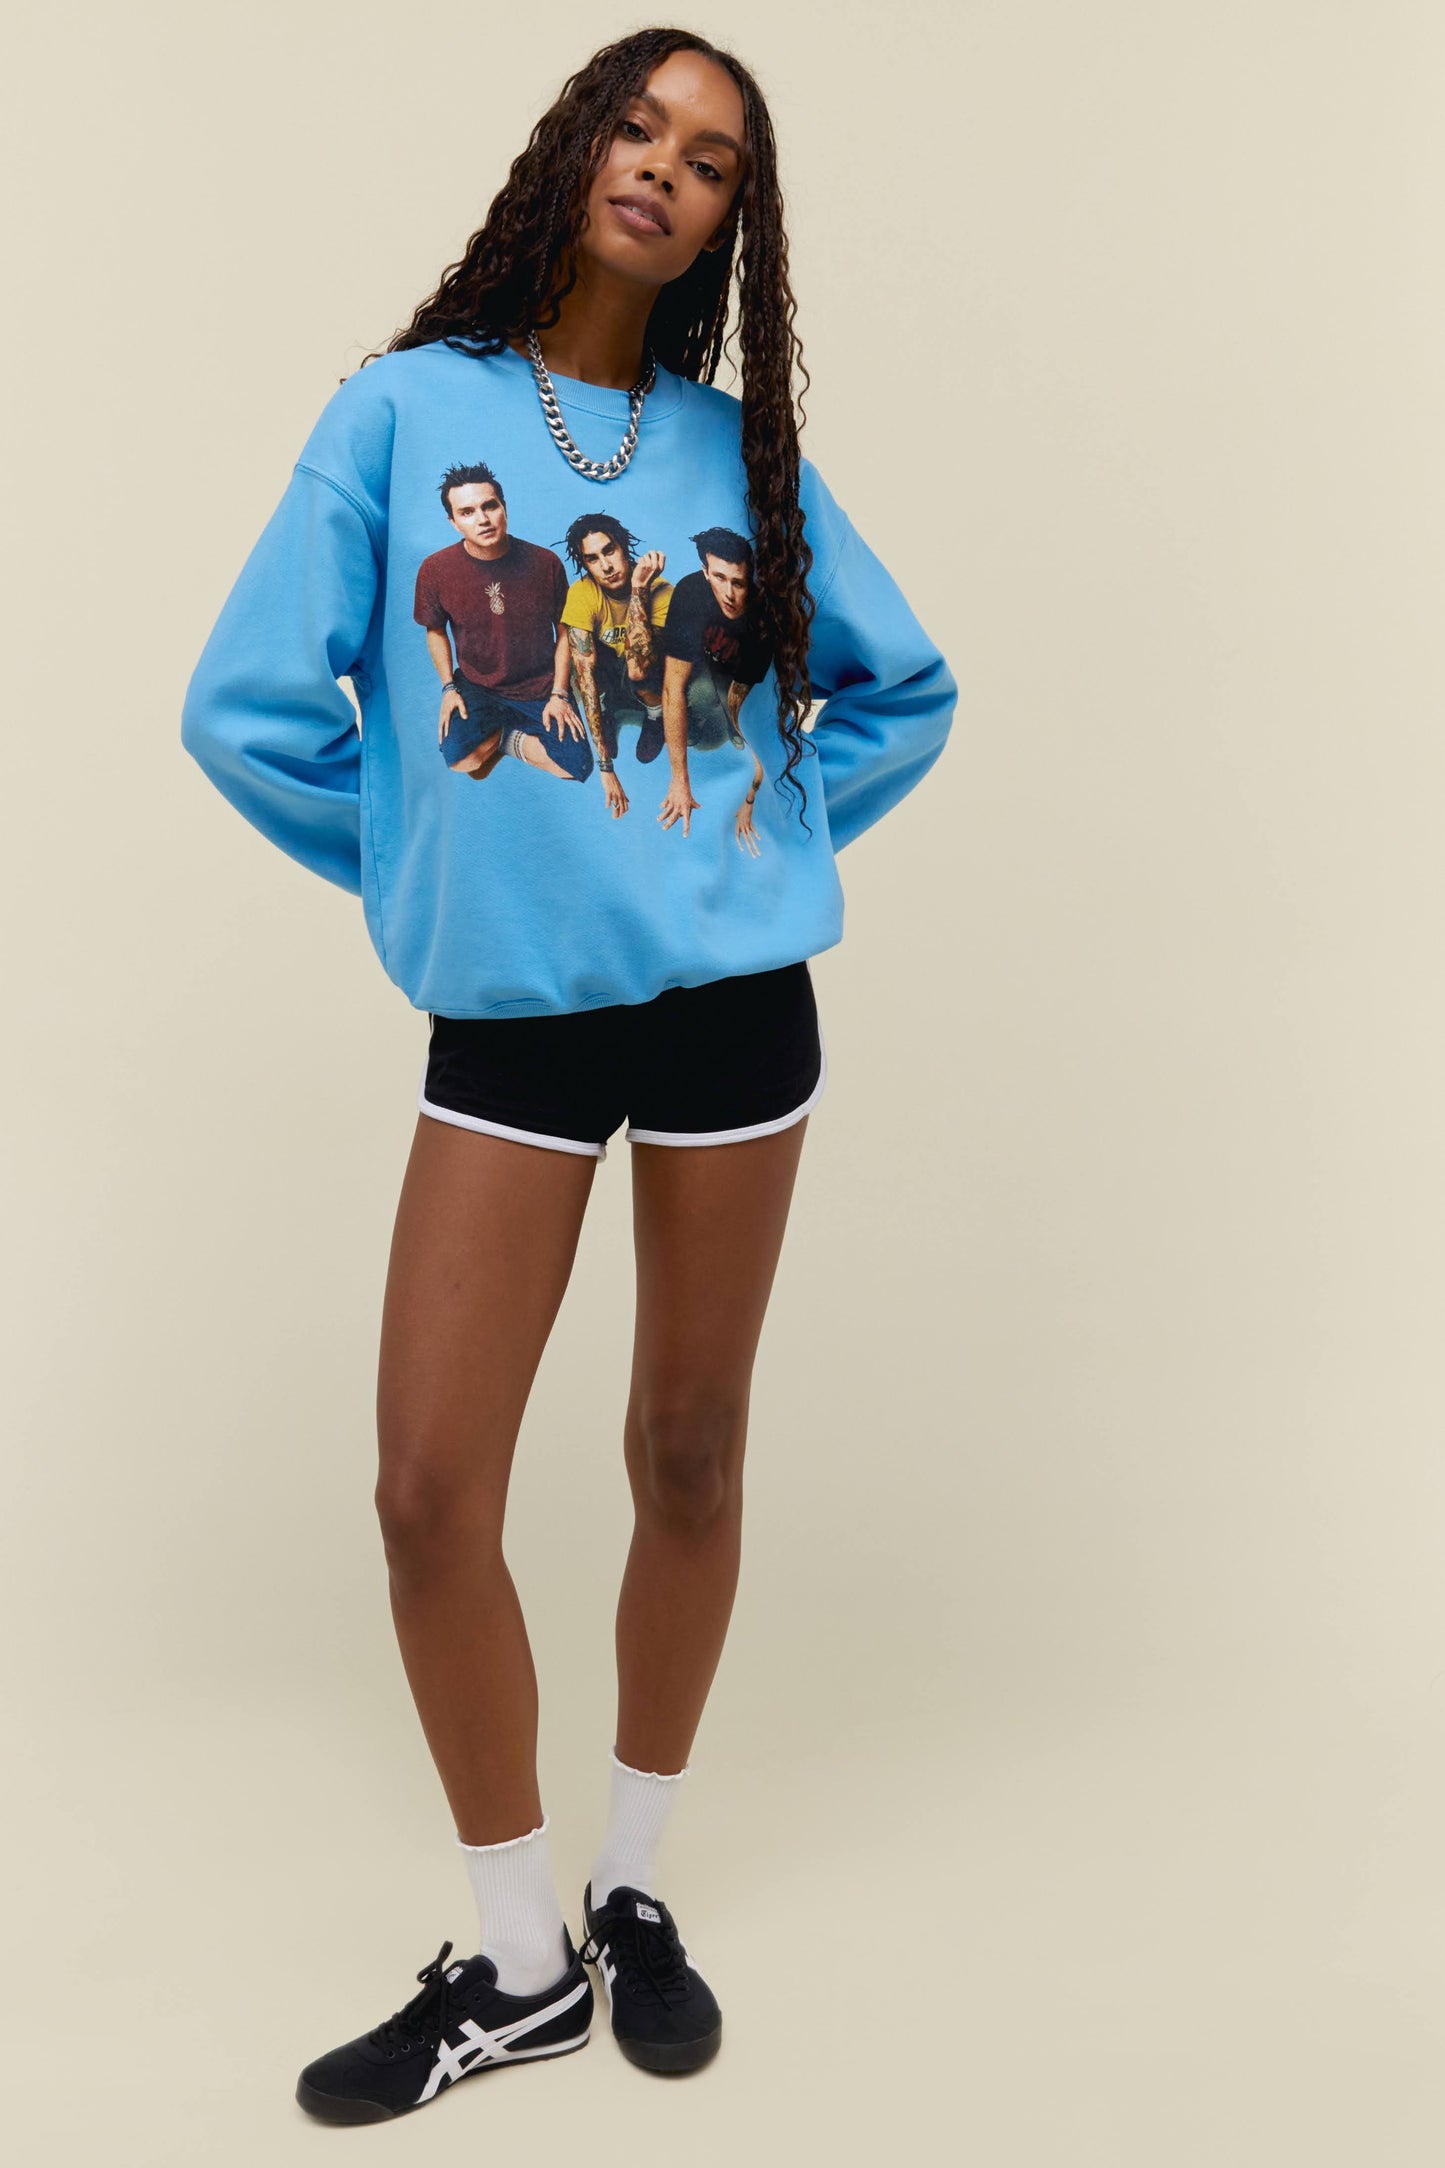 Model wearing a Blink 182 graphic sweatshirt in blue featuring portrait artwork and logo on back